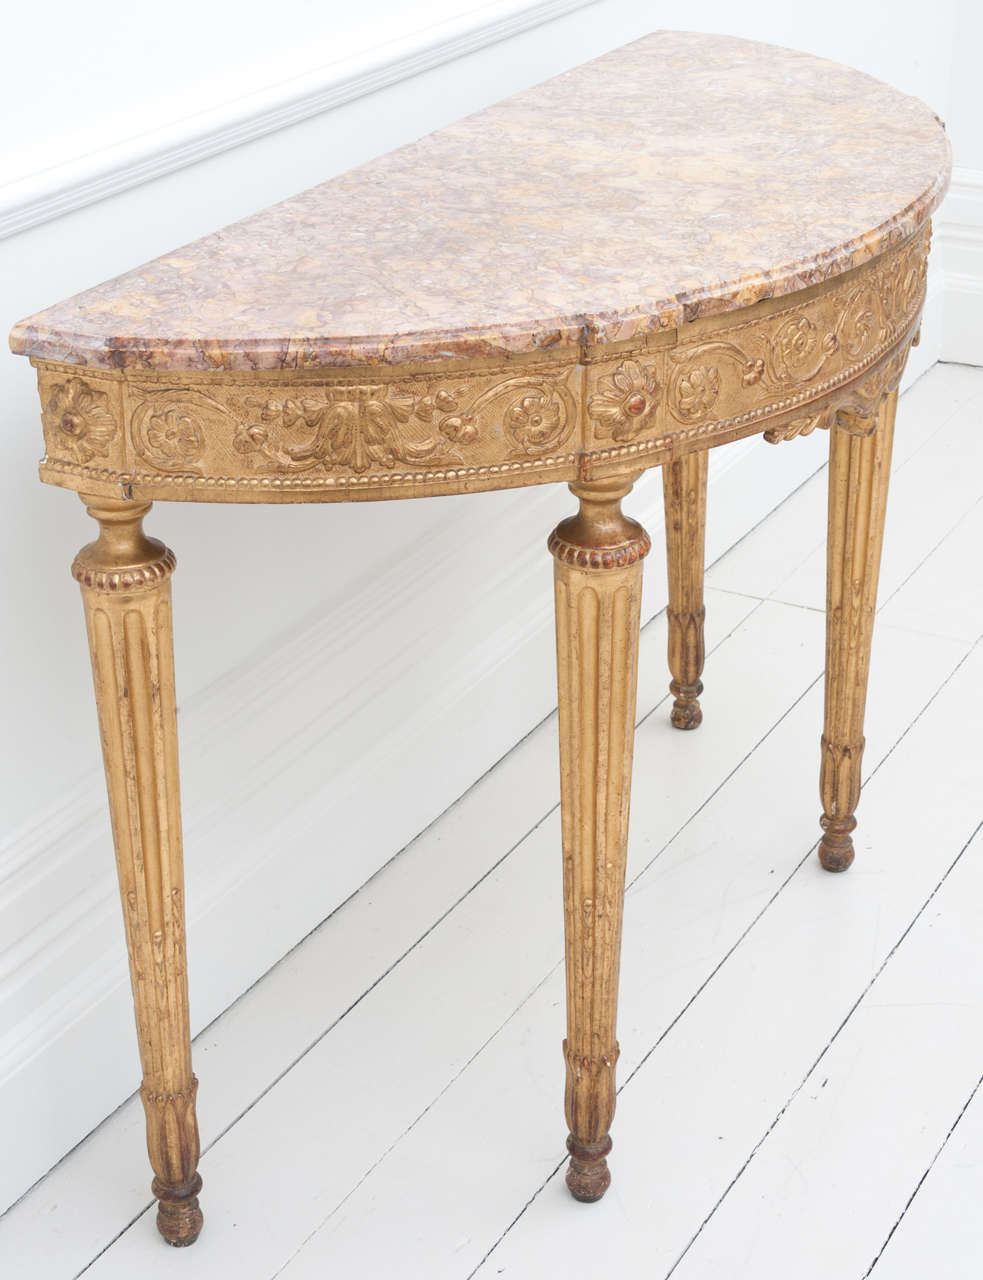 18th Century Italian Genoese Neoclassical Gilded Table For Sale 2